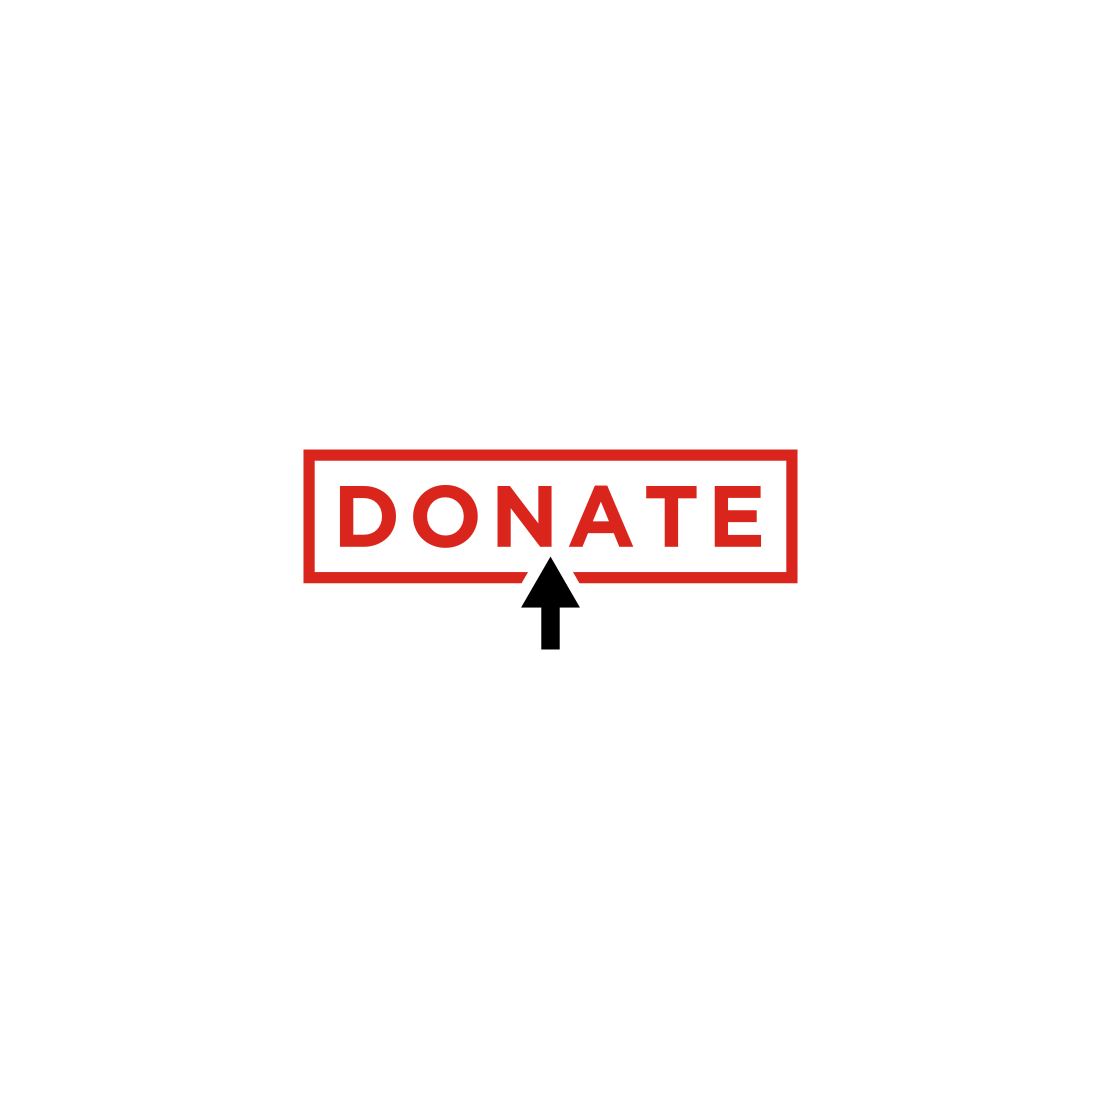 DONATE LOGO VECTOR cover image.